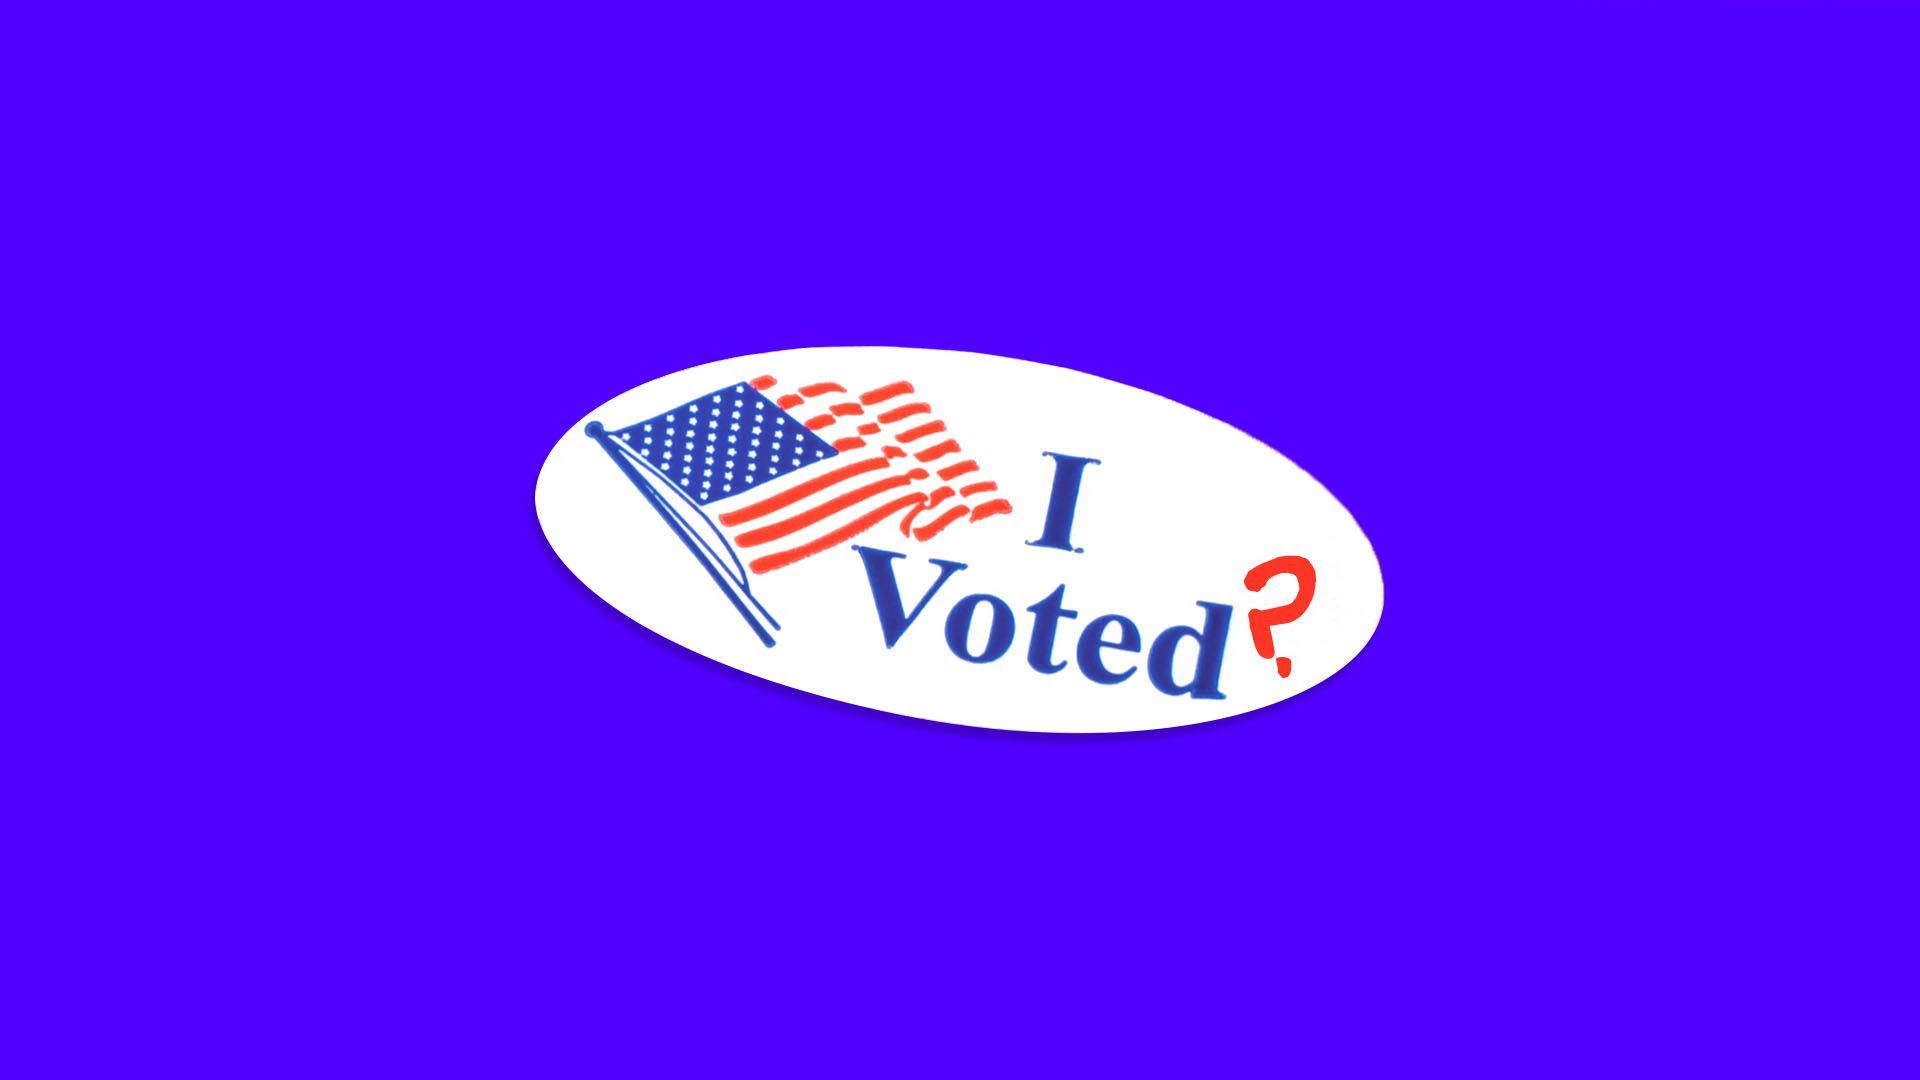 An illustration of an "I voted?" sticker with a question mark